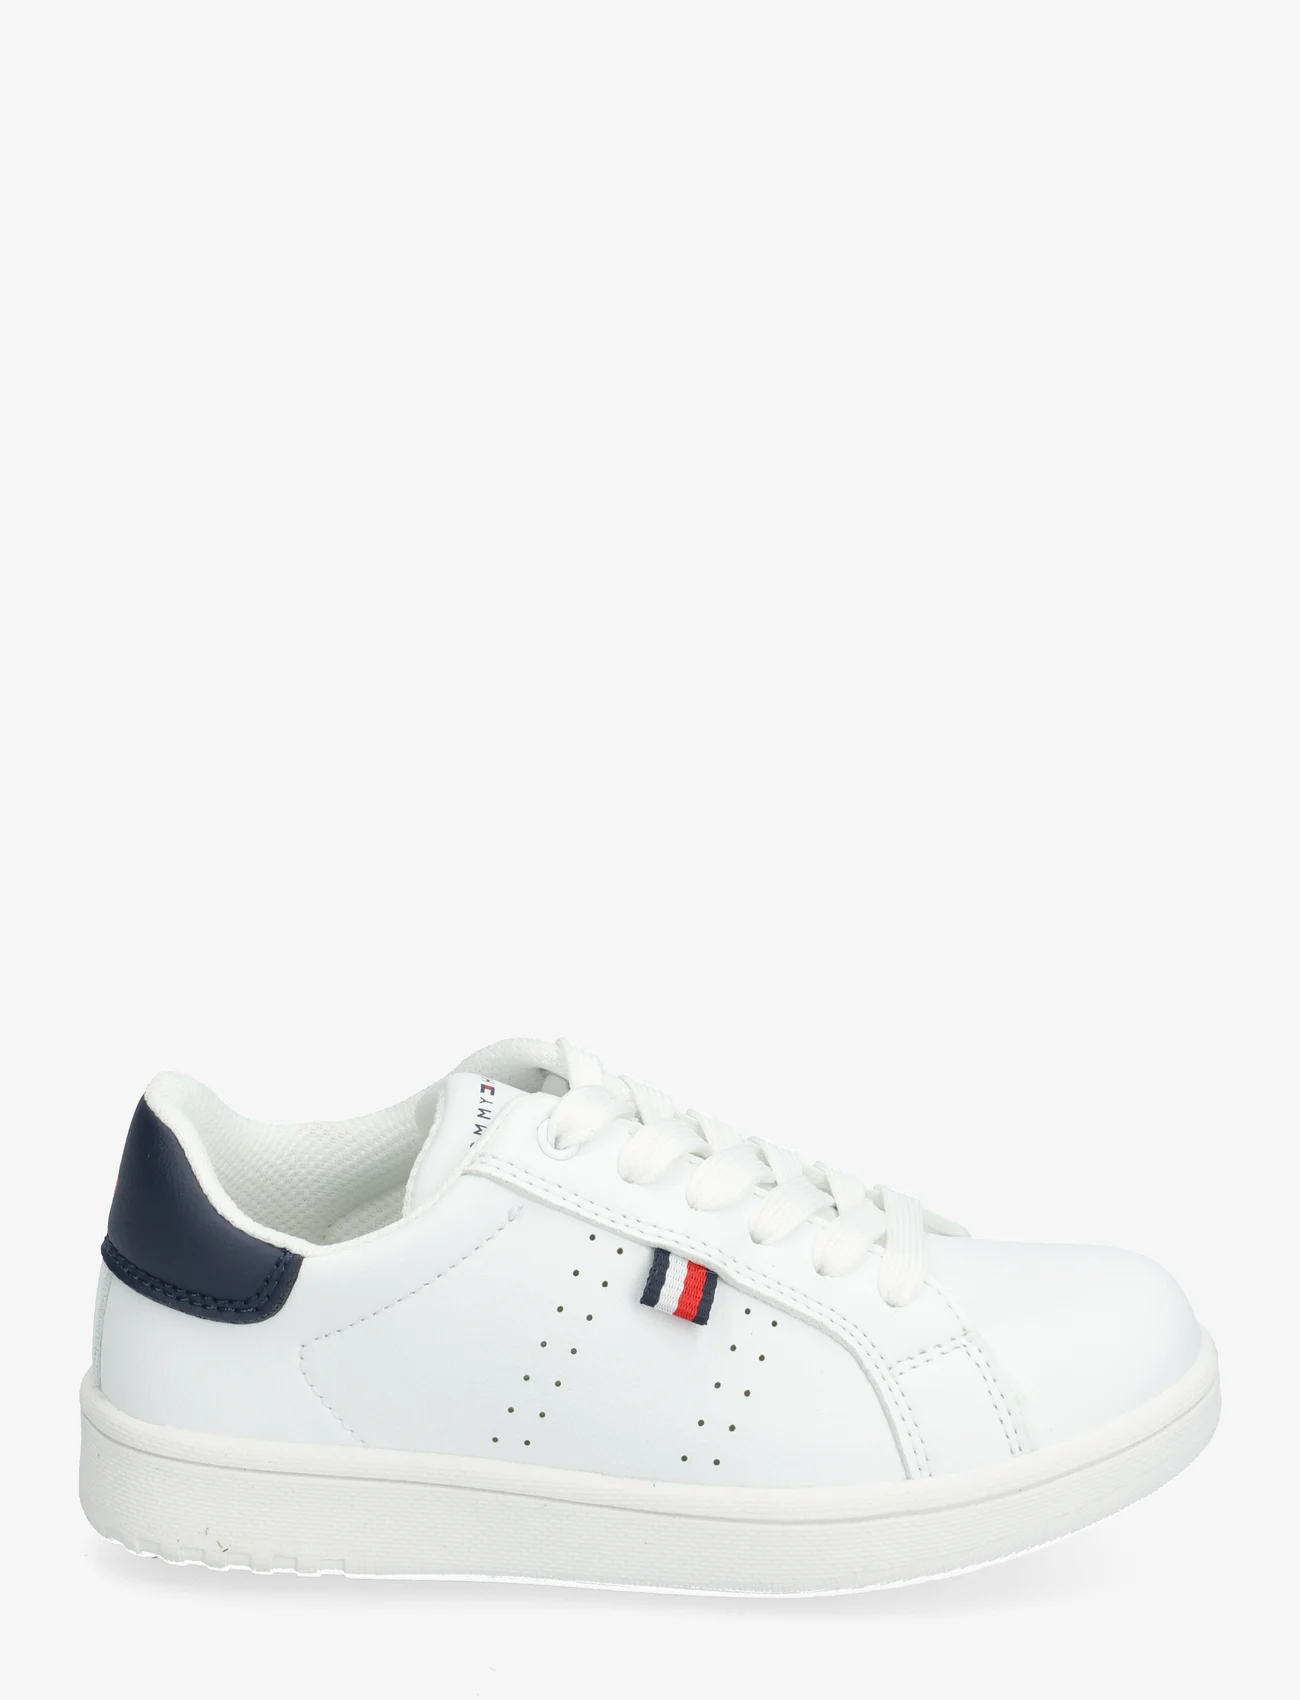 Tommy Hilfiger - LOW CUT LACE-UP SNEAKER - sommerschnäppchen - white - 1